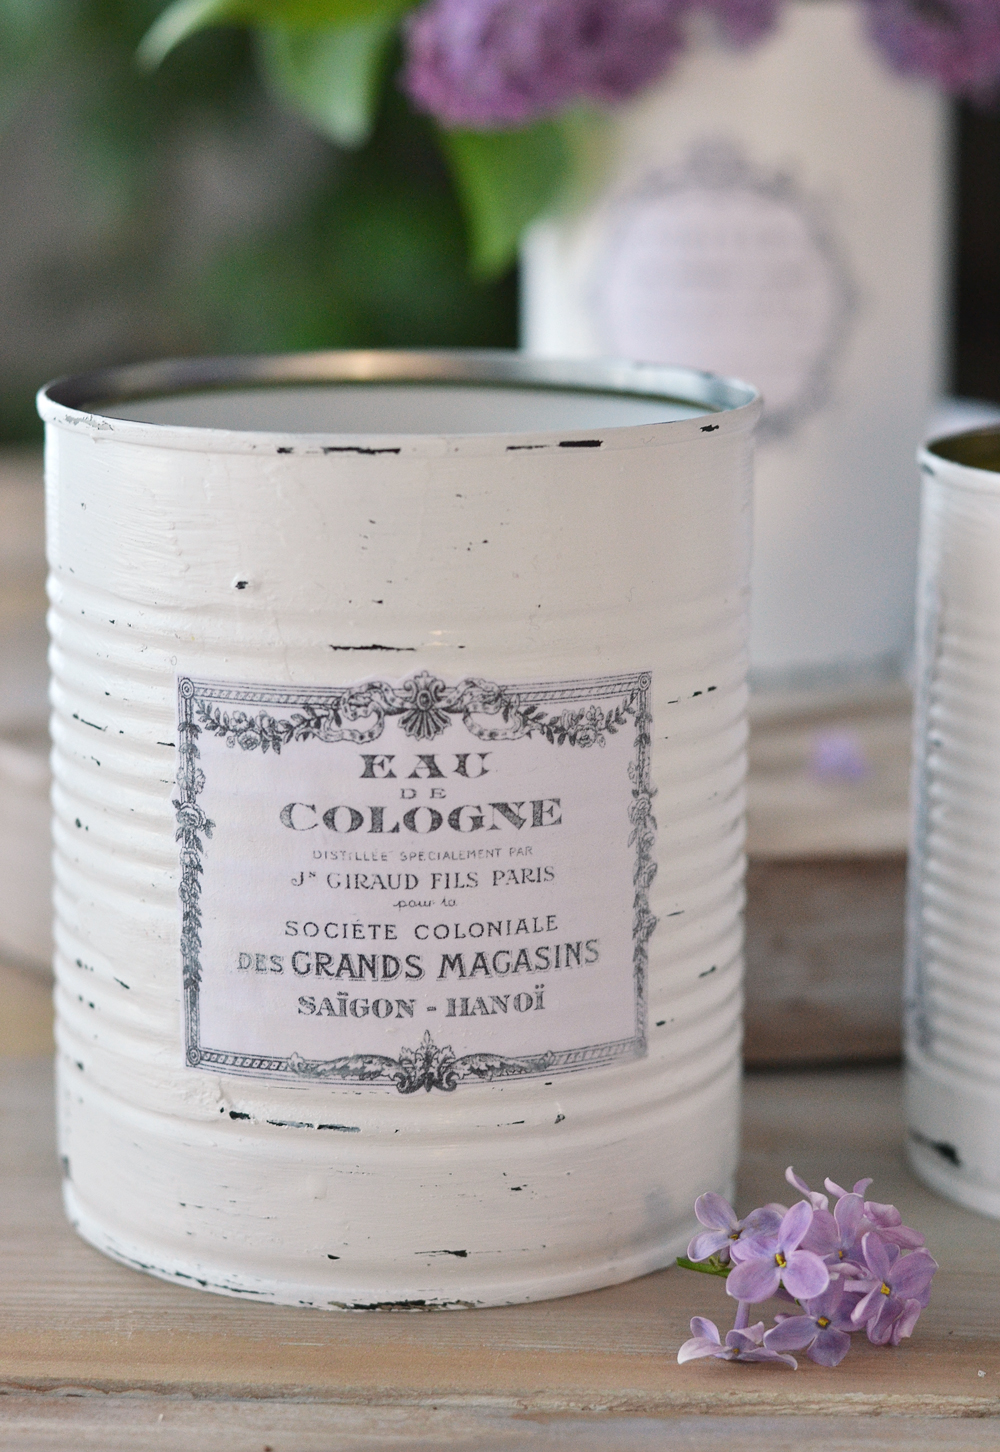 DIY French Recycled Tin Cans - free printable www.bydreamsfactory.com #diy #vintage #french #recycled #freeprintable 